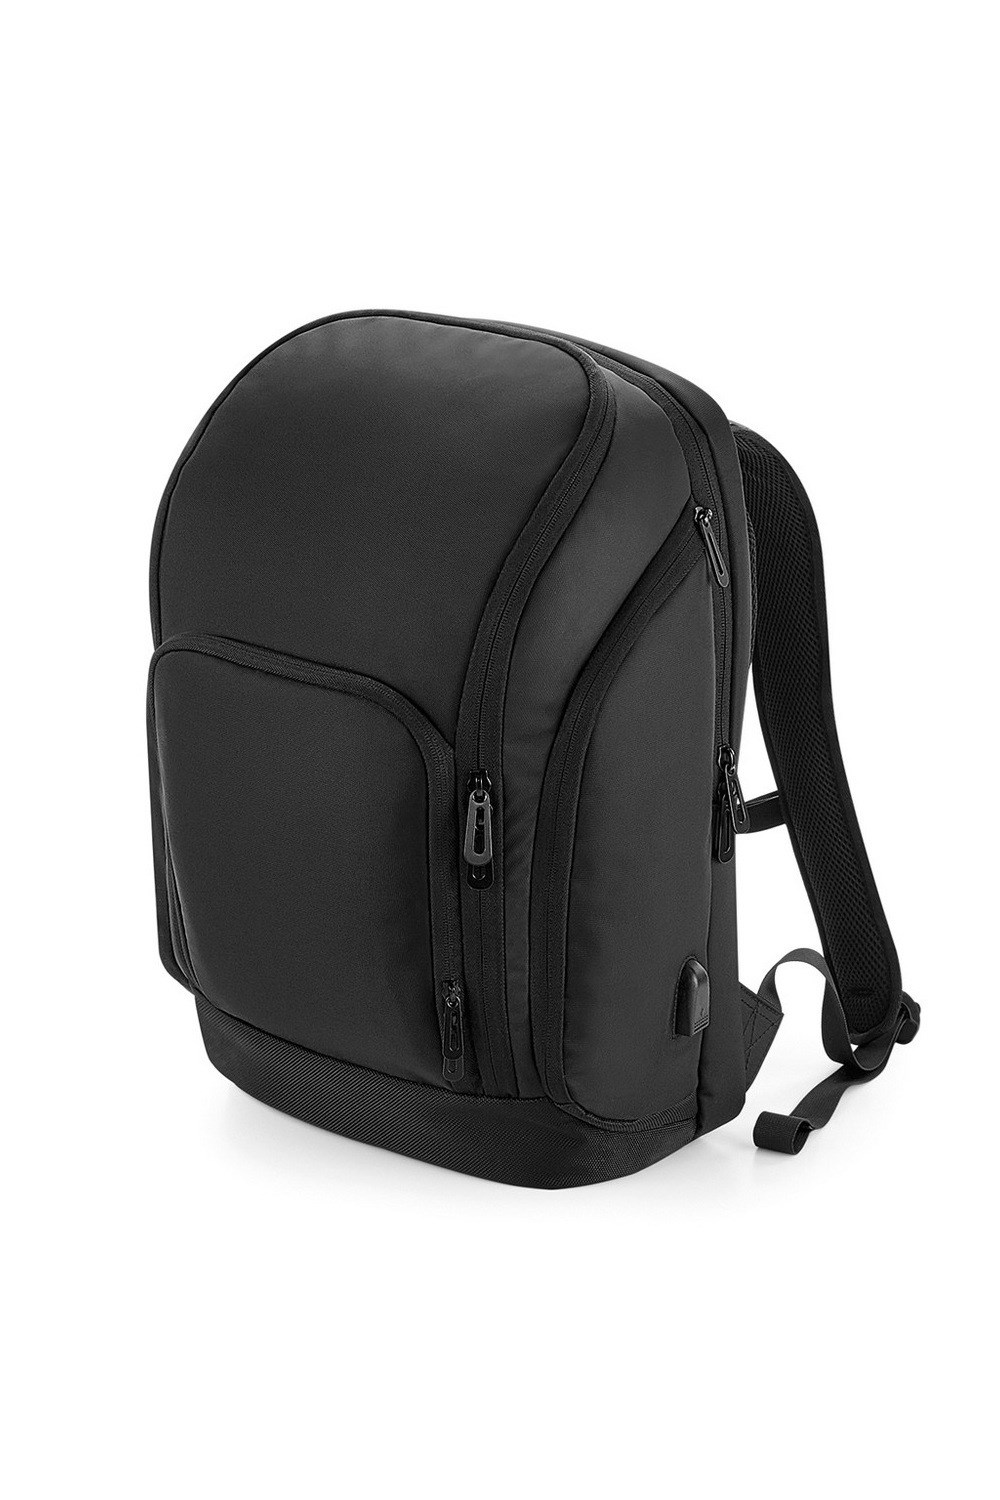 Pro-Tech Charge 25L Backpack -